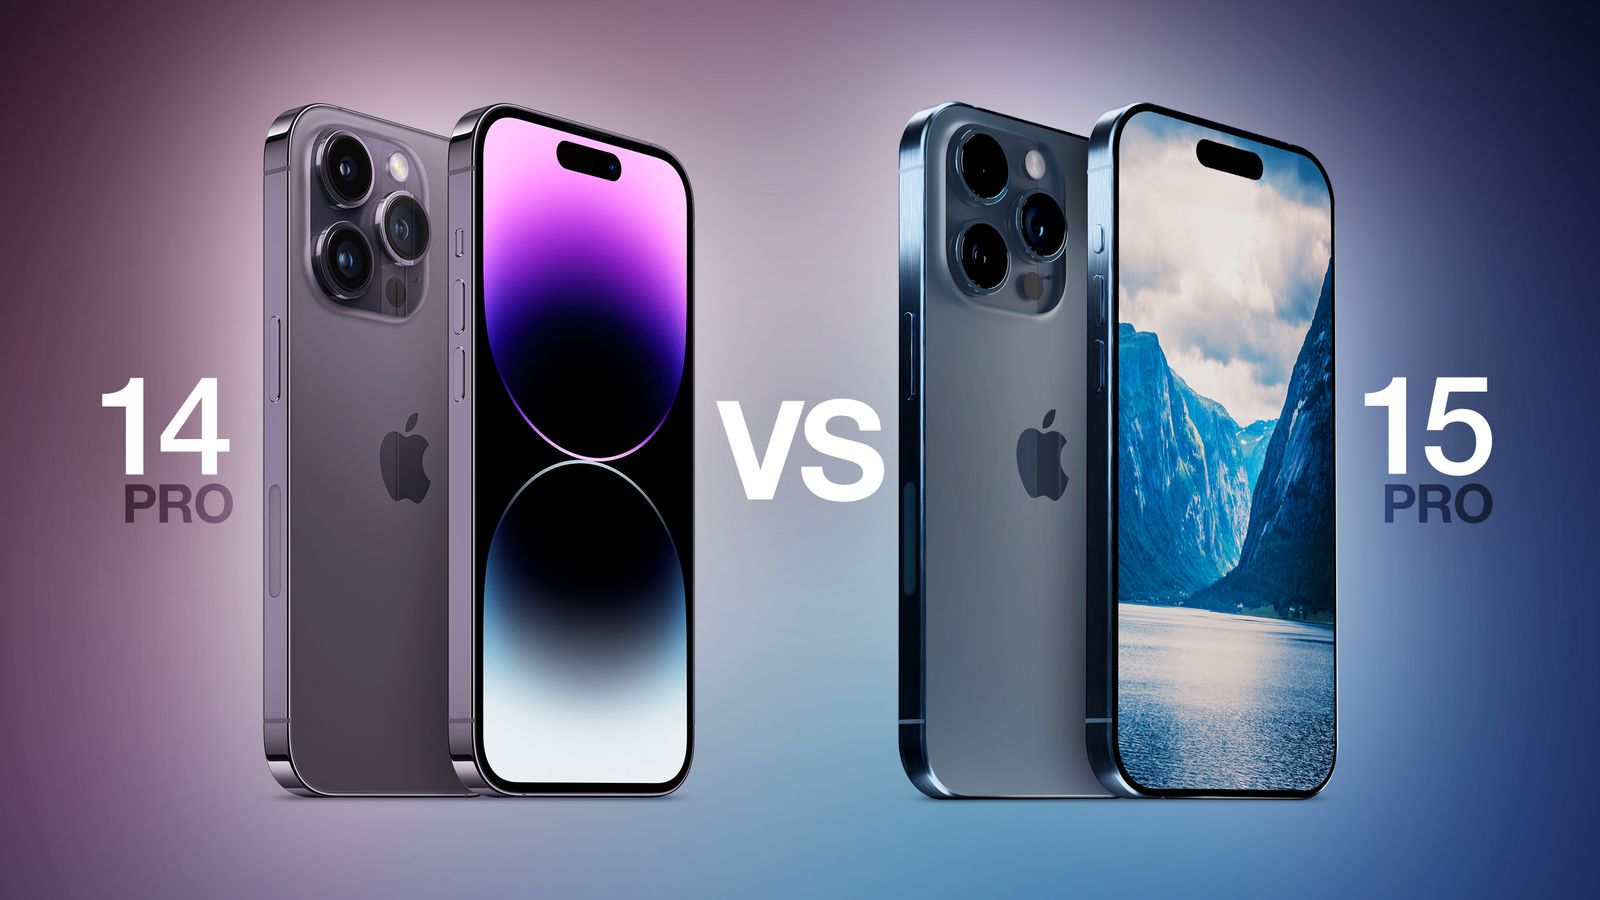 https://images.macrumors.com/t/sY16OpCJw-yTX9Rz3V7Pc0EWGxM=/1600x0/article-new/2023/08/iPhone-14-Pro-vs-iPhone-15-Pro-Feature-2.jpg